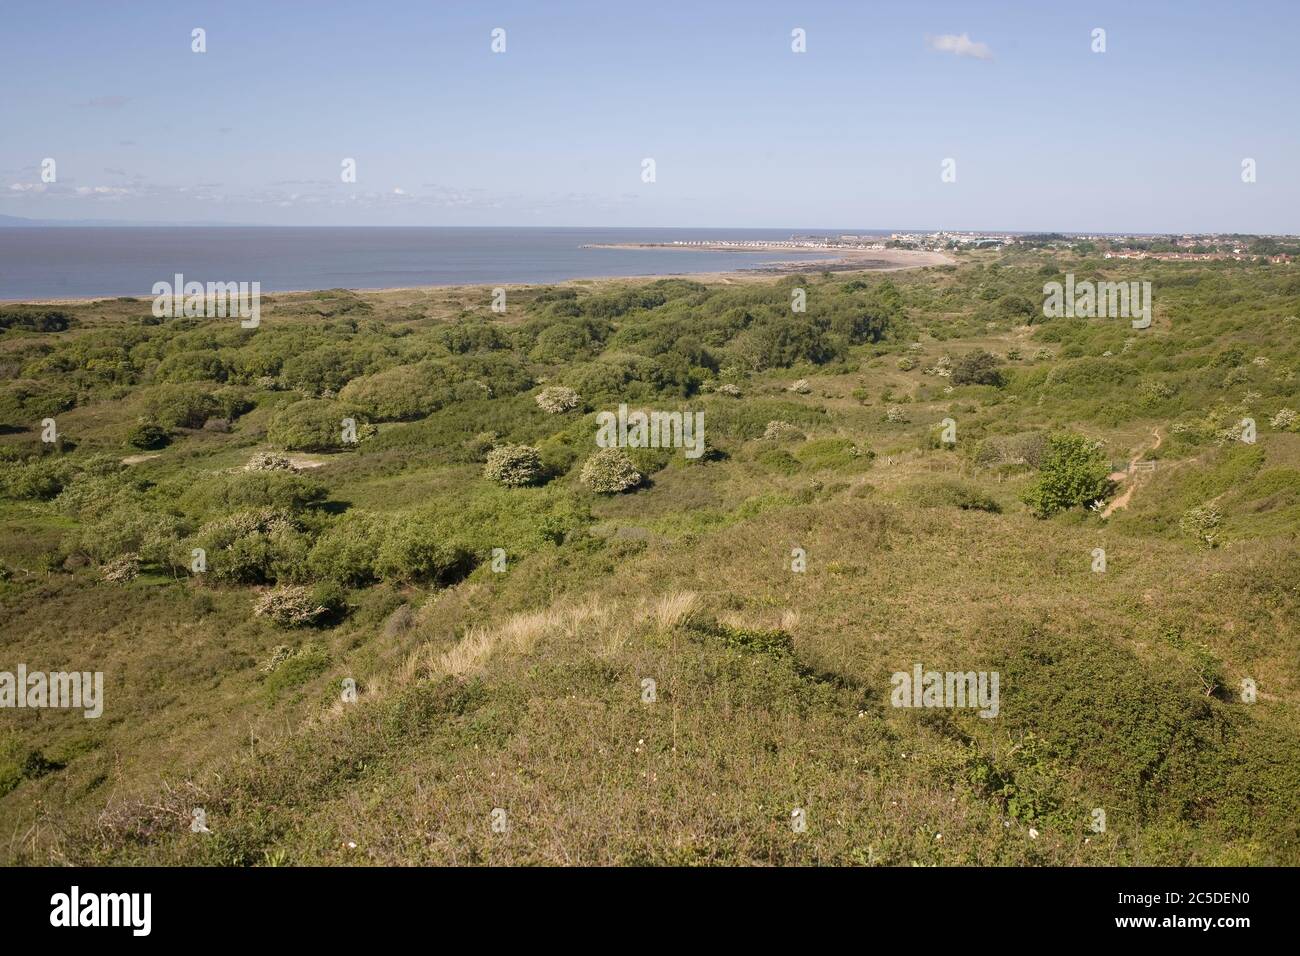 View from a hill in Merthry Mawr warren national nature reserve of Glamorgan heritage coast with Porthcawl in distance Stock Photo